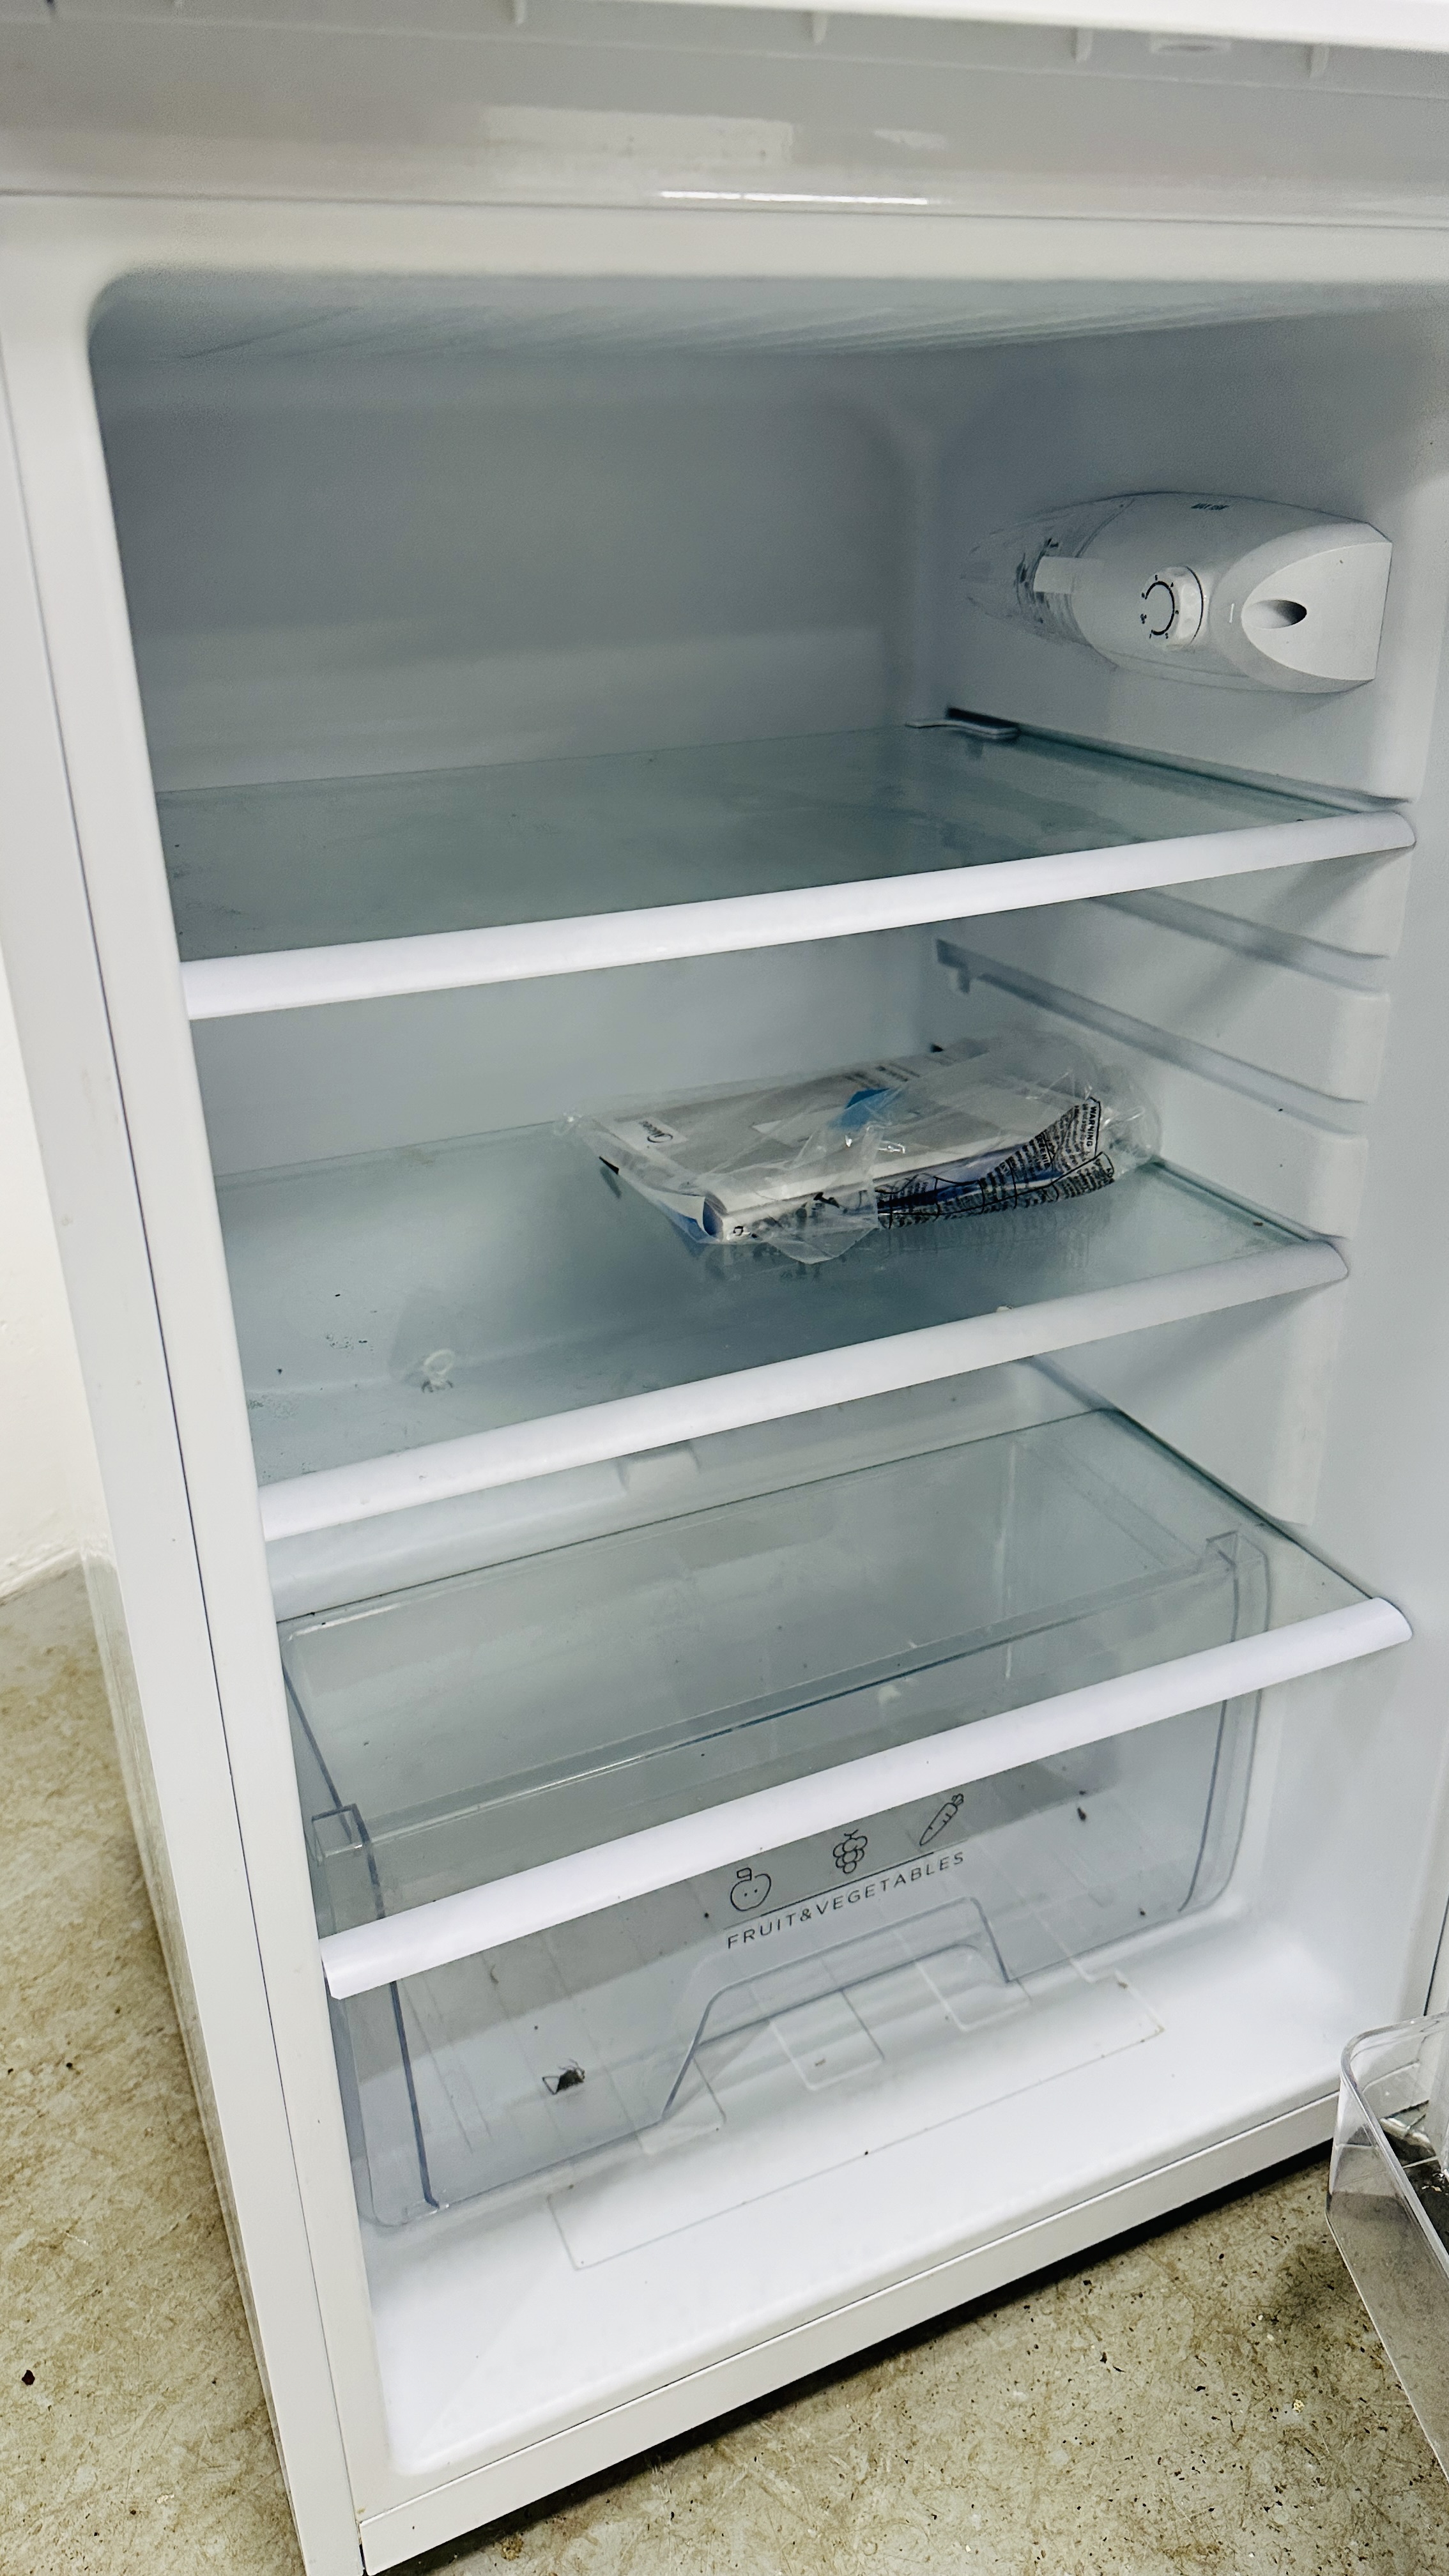 MEDIA UNDER COUNTER FRIDGE MODEL MDRD194FGF01 - SOLD AS SEEN. - Image 2 of 6